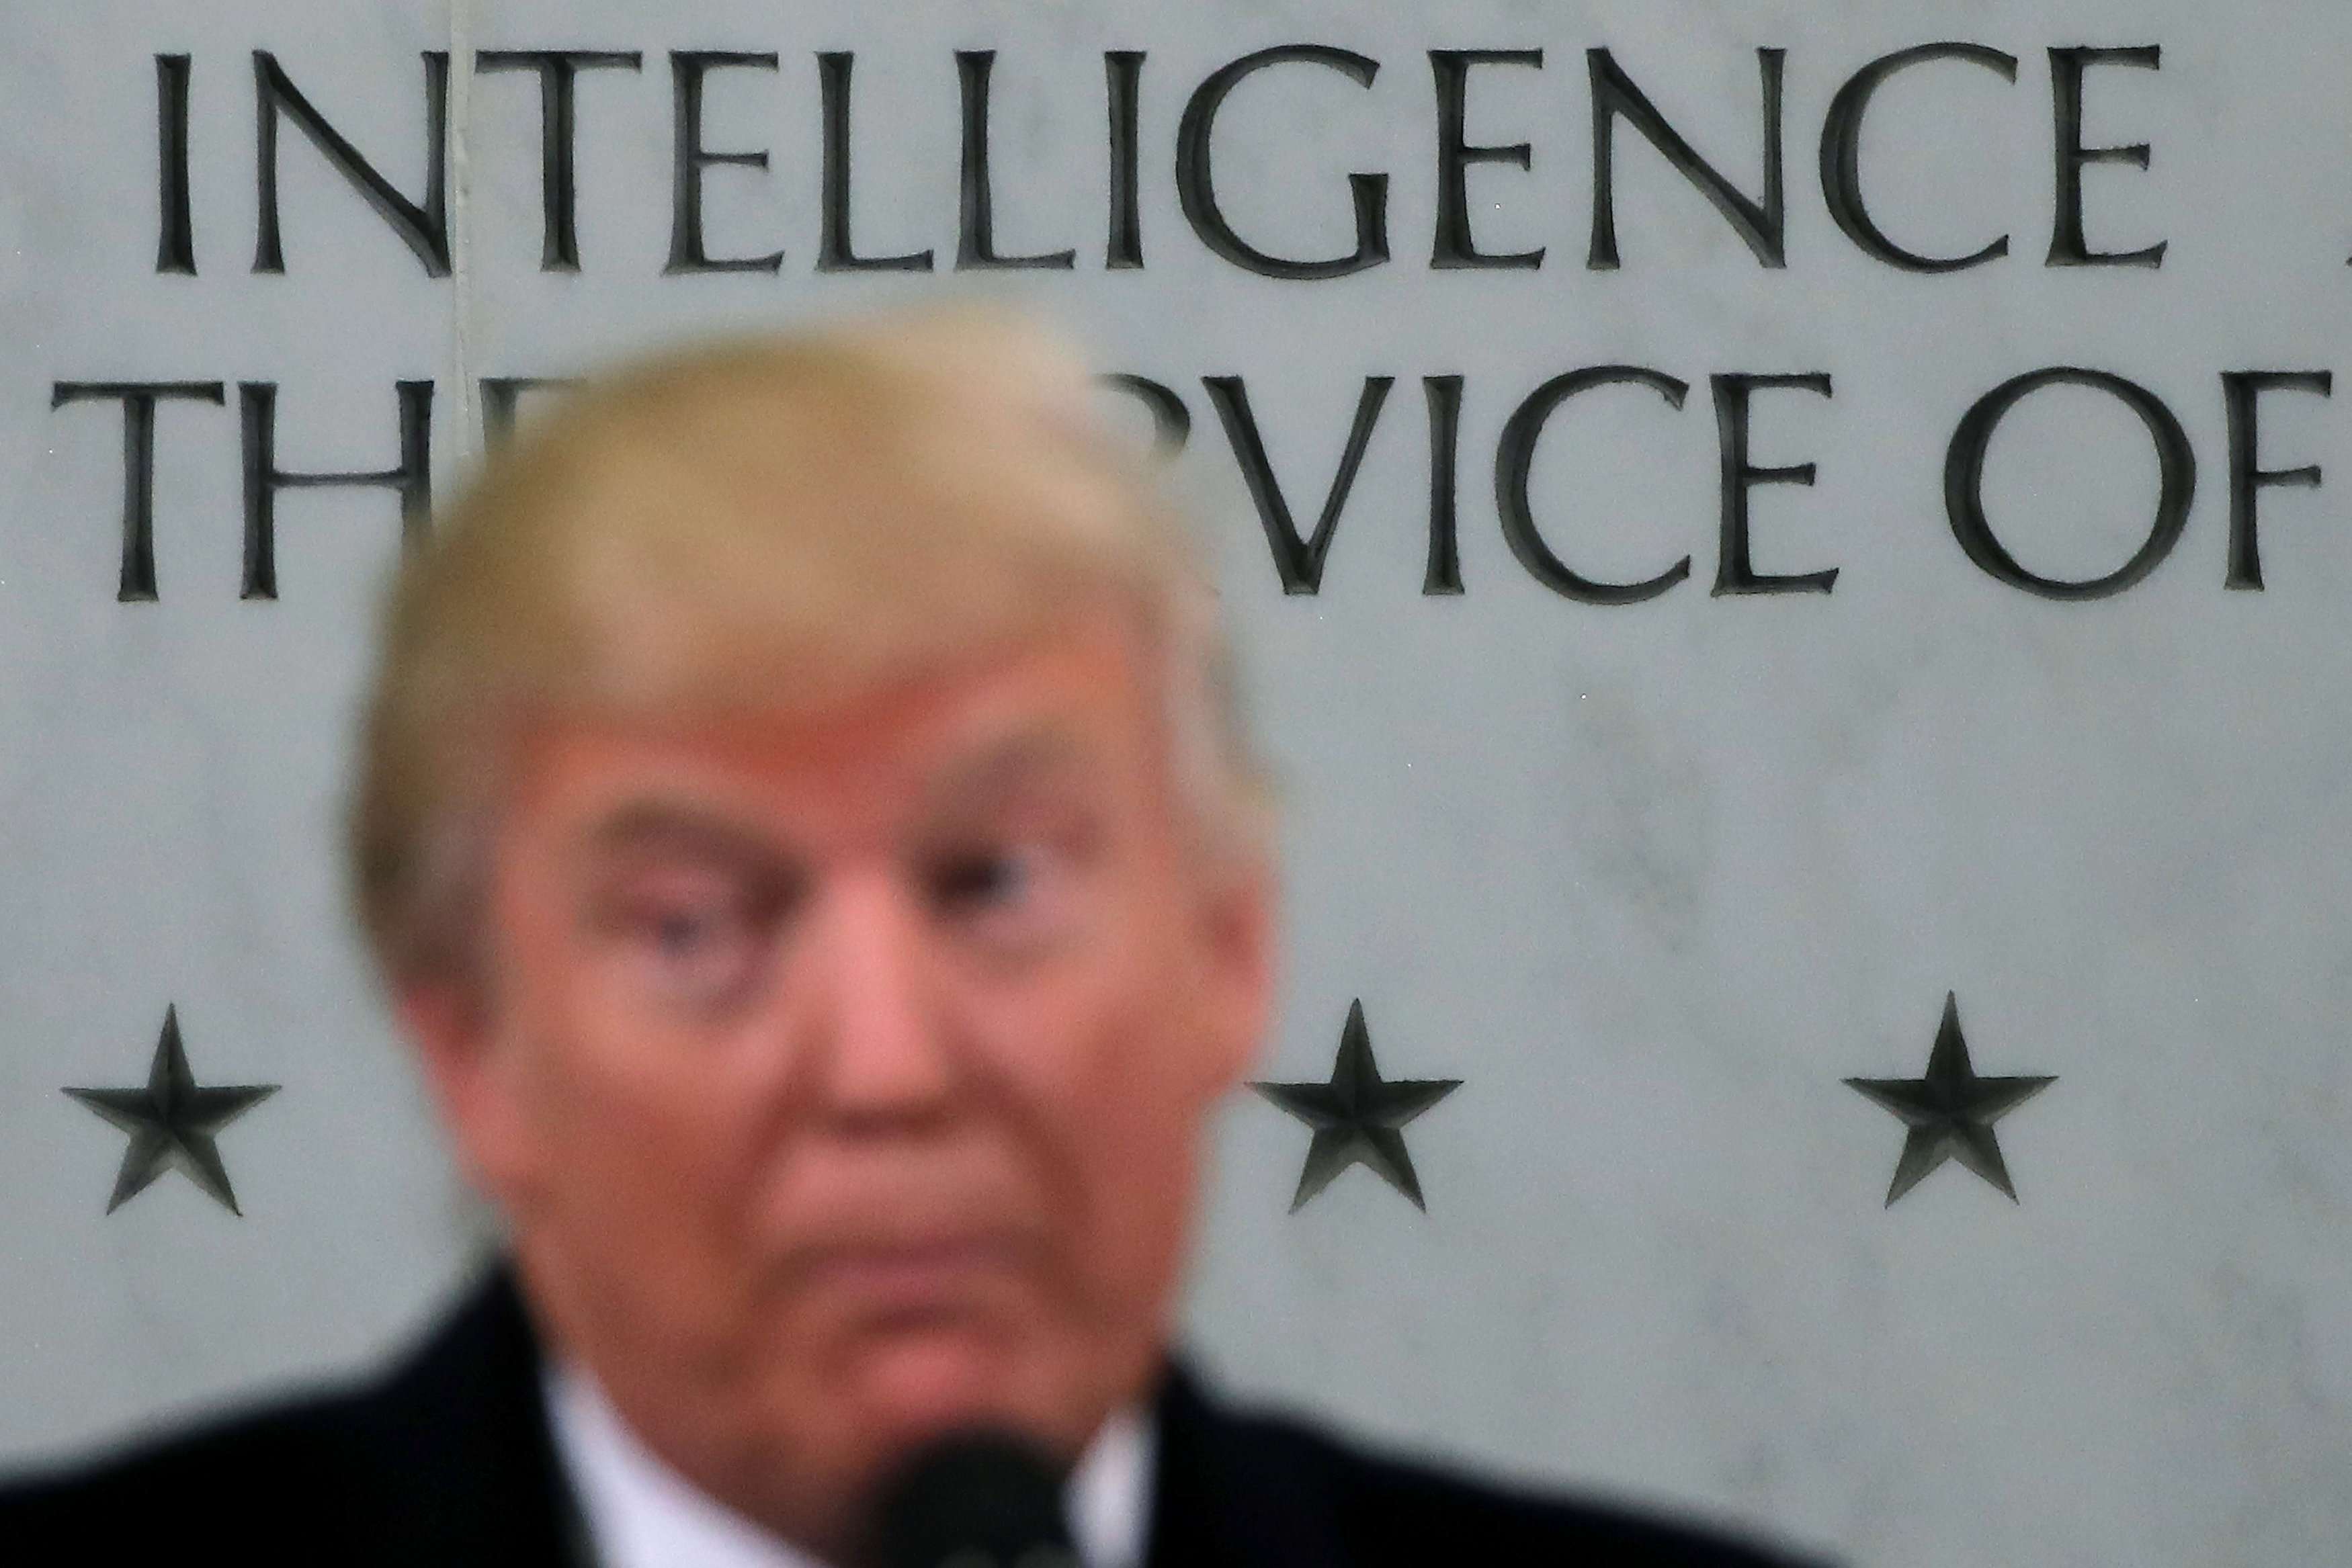 On his first full day in office, President Donald Trump on Saturday berated the media over its coverage of his inauguration, and turned a bridge-building first visit to CIA headquarters into an airing of grievances about ‘dishonest’ journalists. Photo: Reuters